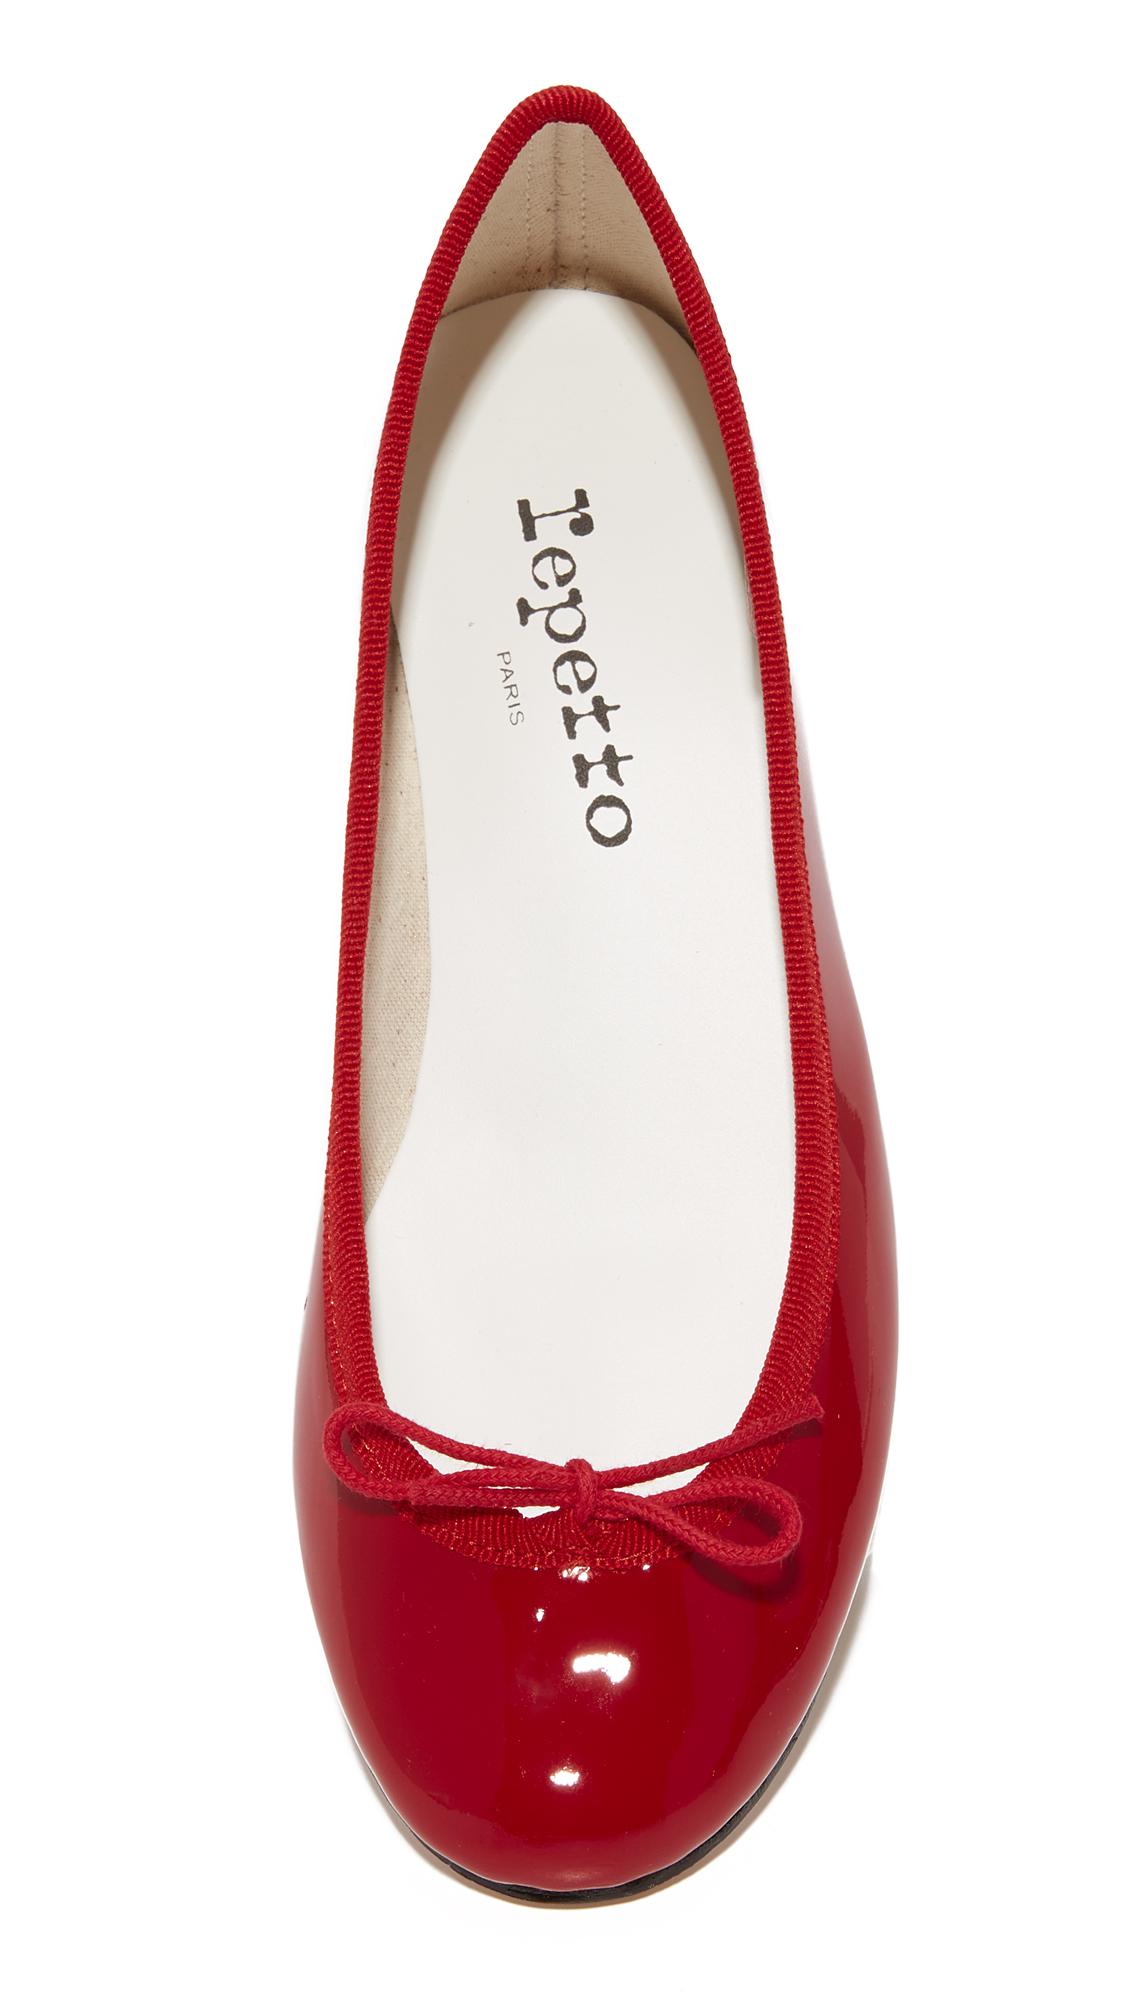 Virus se tv sammensmeltning Repetto Leather Camille Ballerina Heels in Red - Lyst